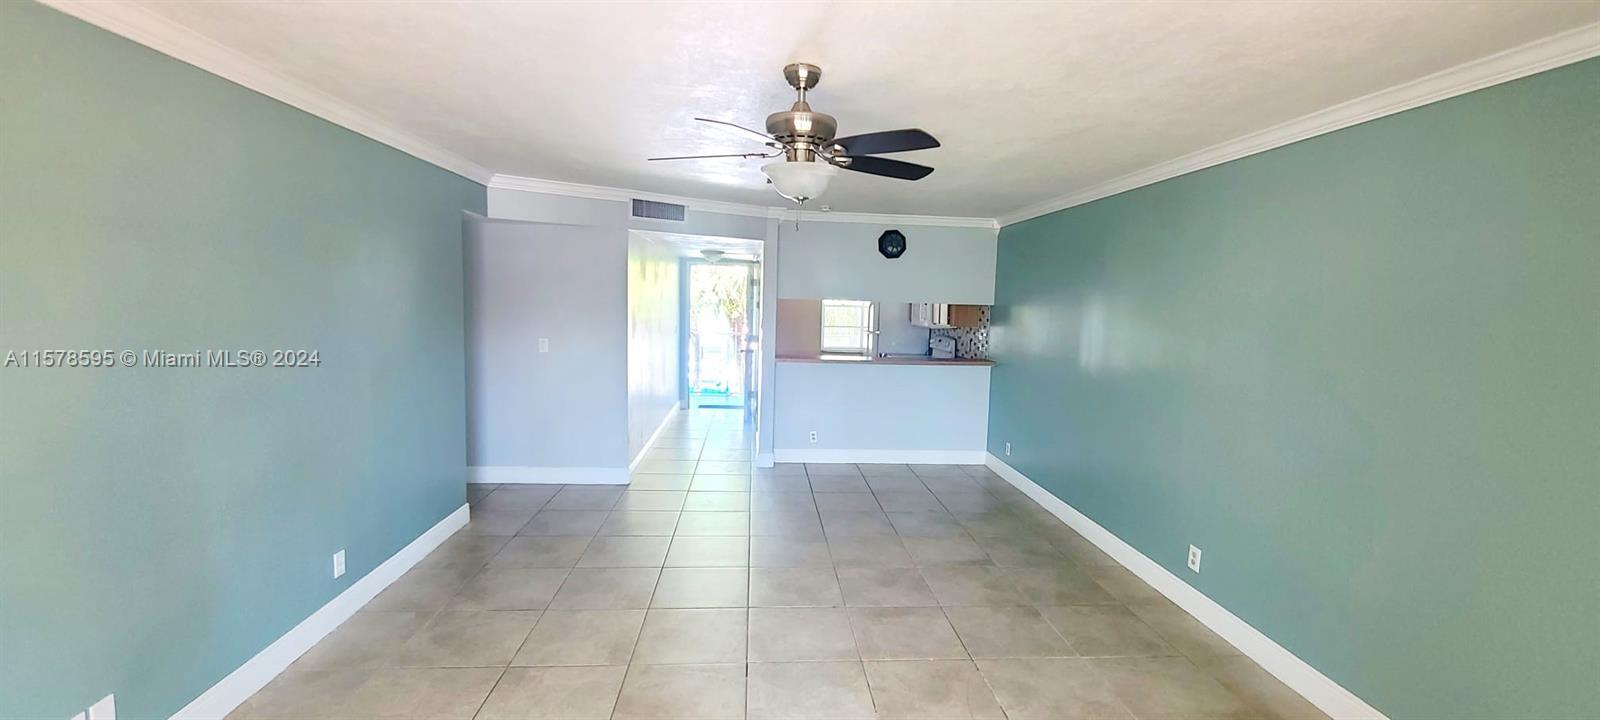 Photo of 2750 Forest Hills Blvd #207 in Coral Springs, FL